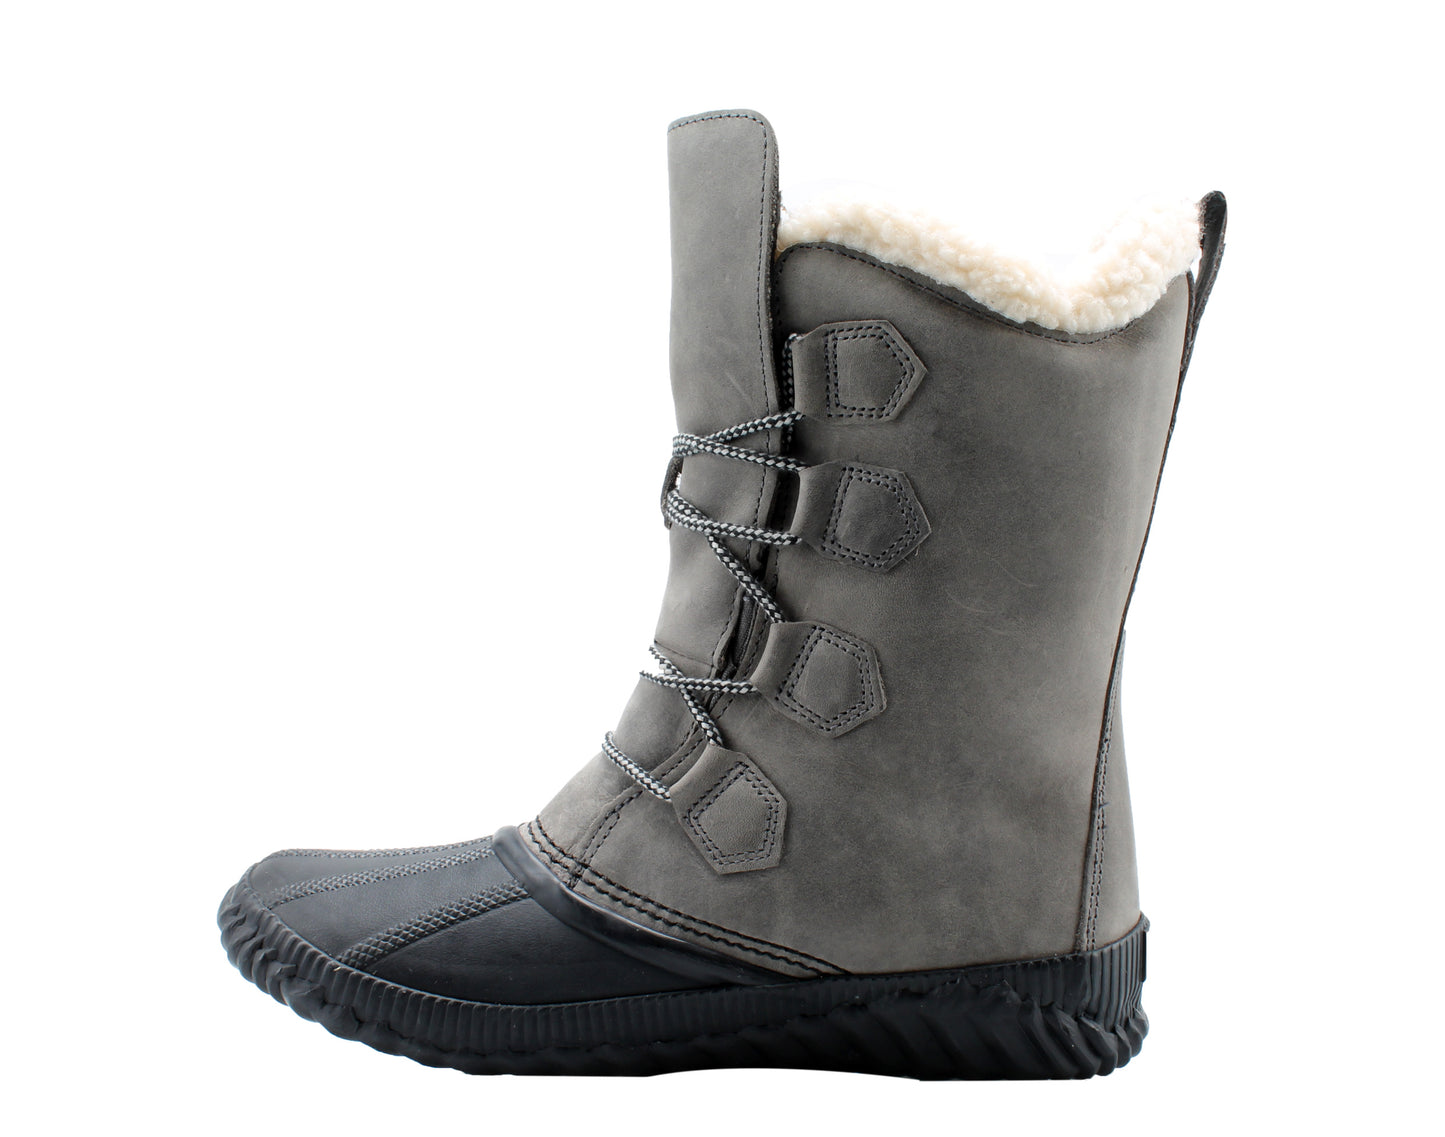 Sorel Out 'N About Plus Tall Quarry Women's Waterproof Snow Boots 1833581-052